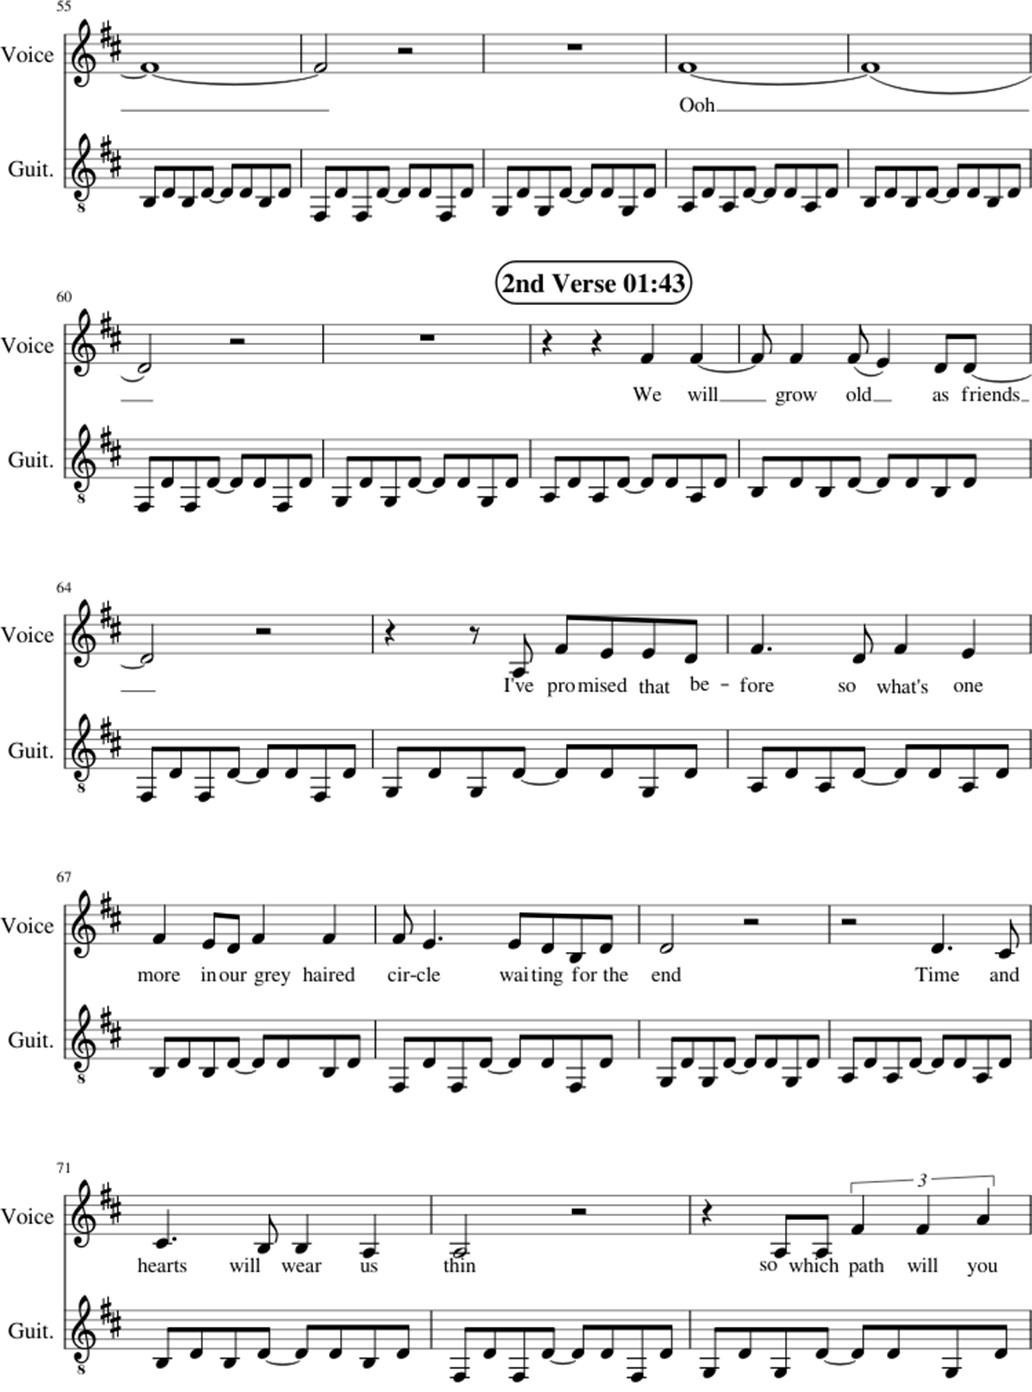 Sick of losing soulmate sheet music notes 4